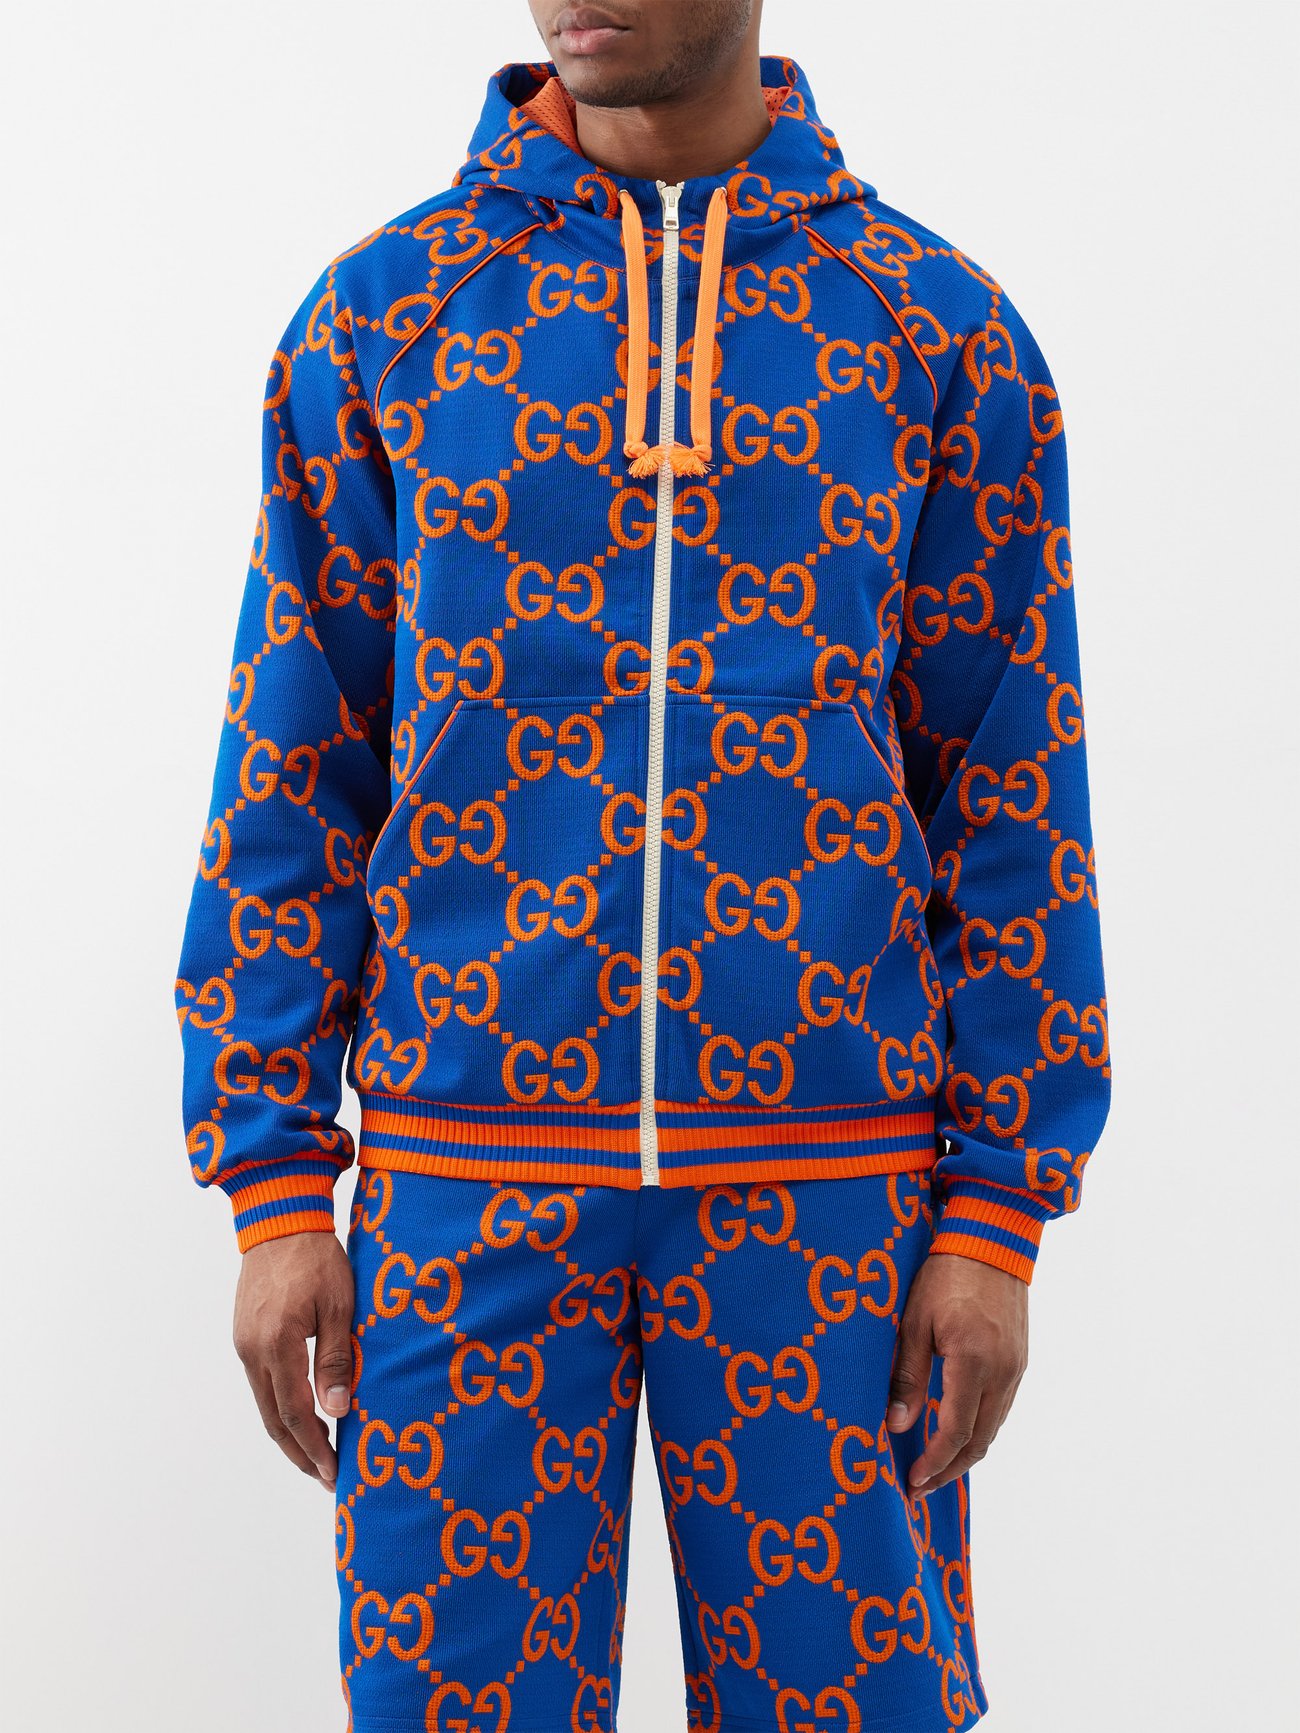 MENS GUCCI TRACKSUIT - Jacket / Pants included, XXXL